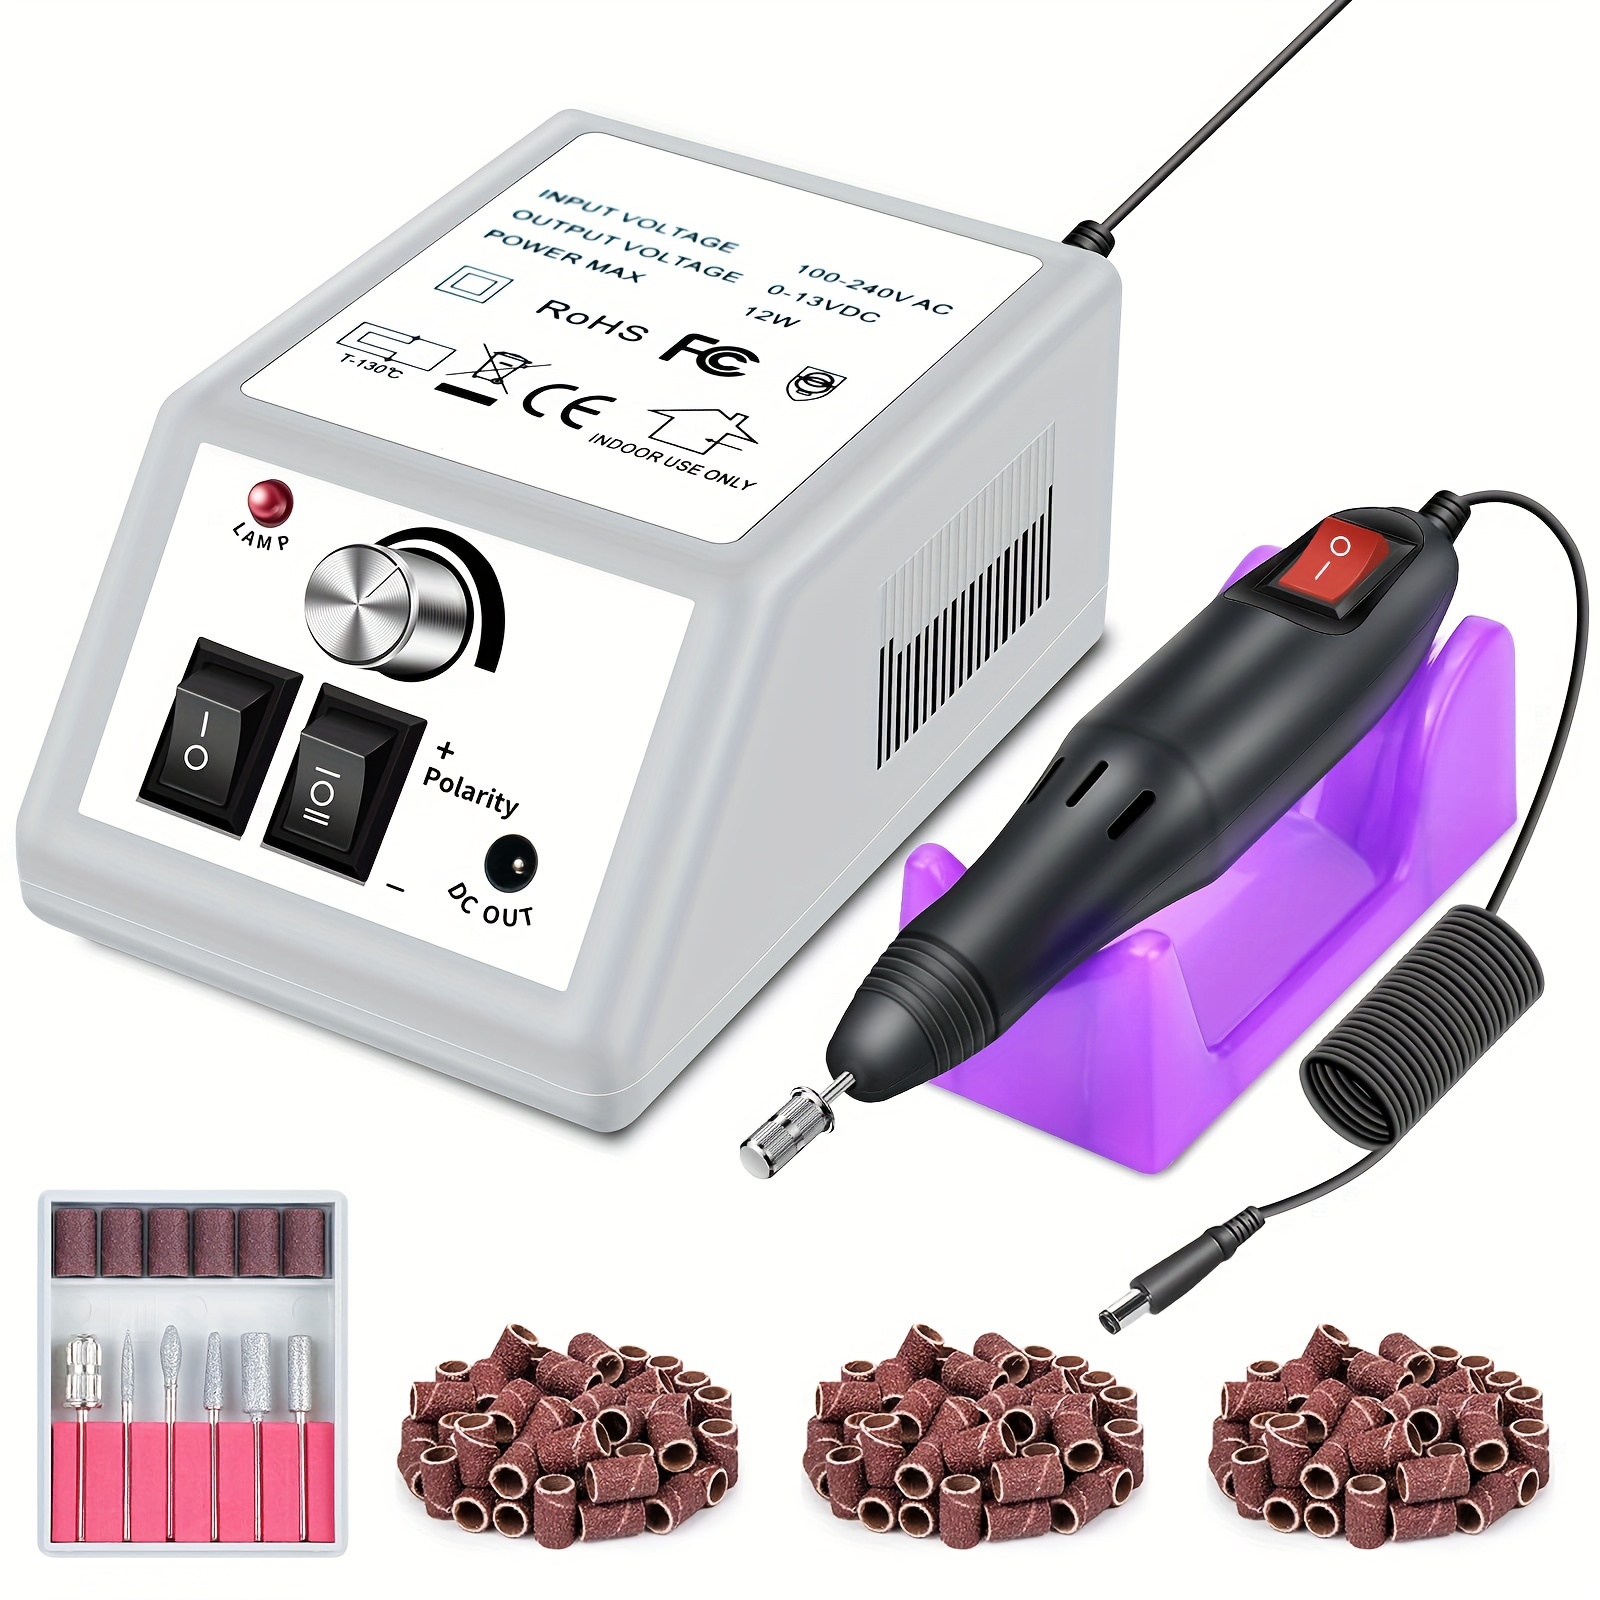 

Electric Nail Drill Machine Nails File Electric Nail Drill Kit Low Noise Vibration With 156pcs Sanding Bands Gel Nails Polisher Sets For Home Salon Use Manicure Pedicure (gray)